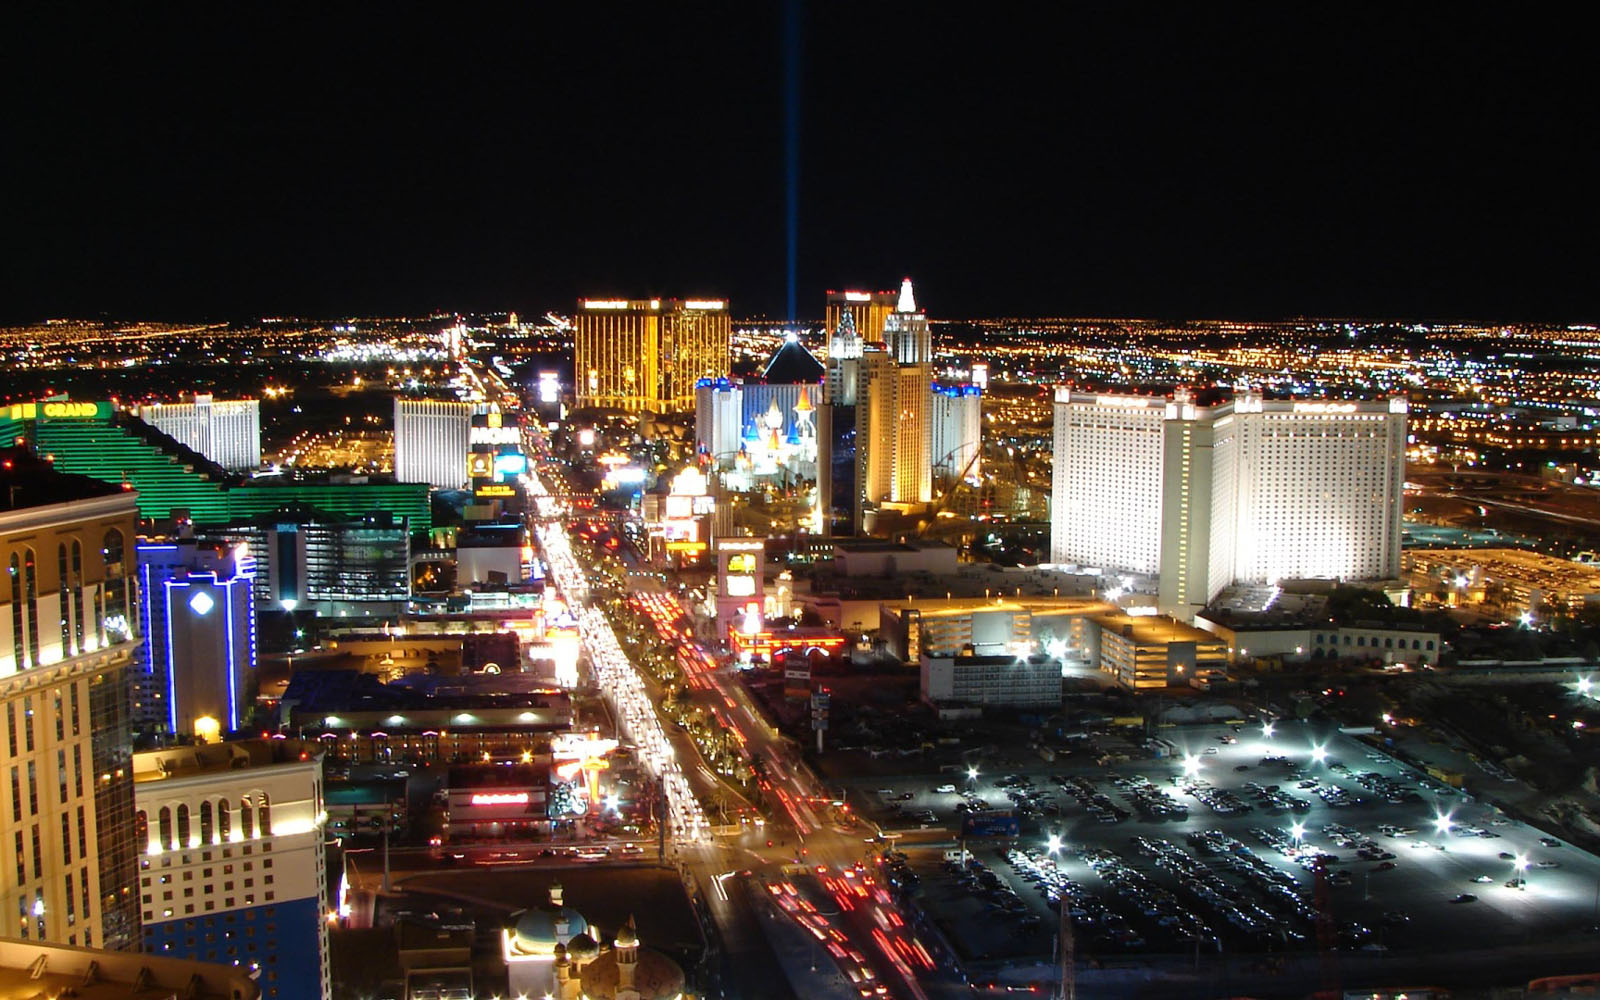 Tag Las Vegas Wallpaper Background Photos Image Andpictures For